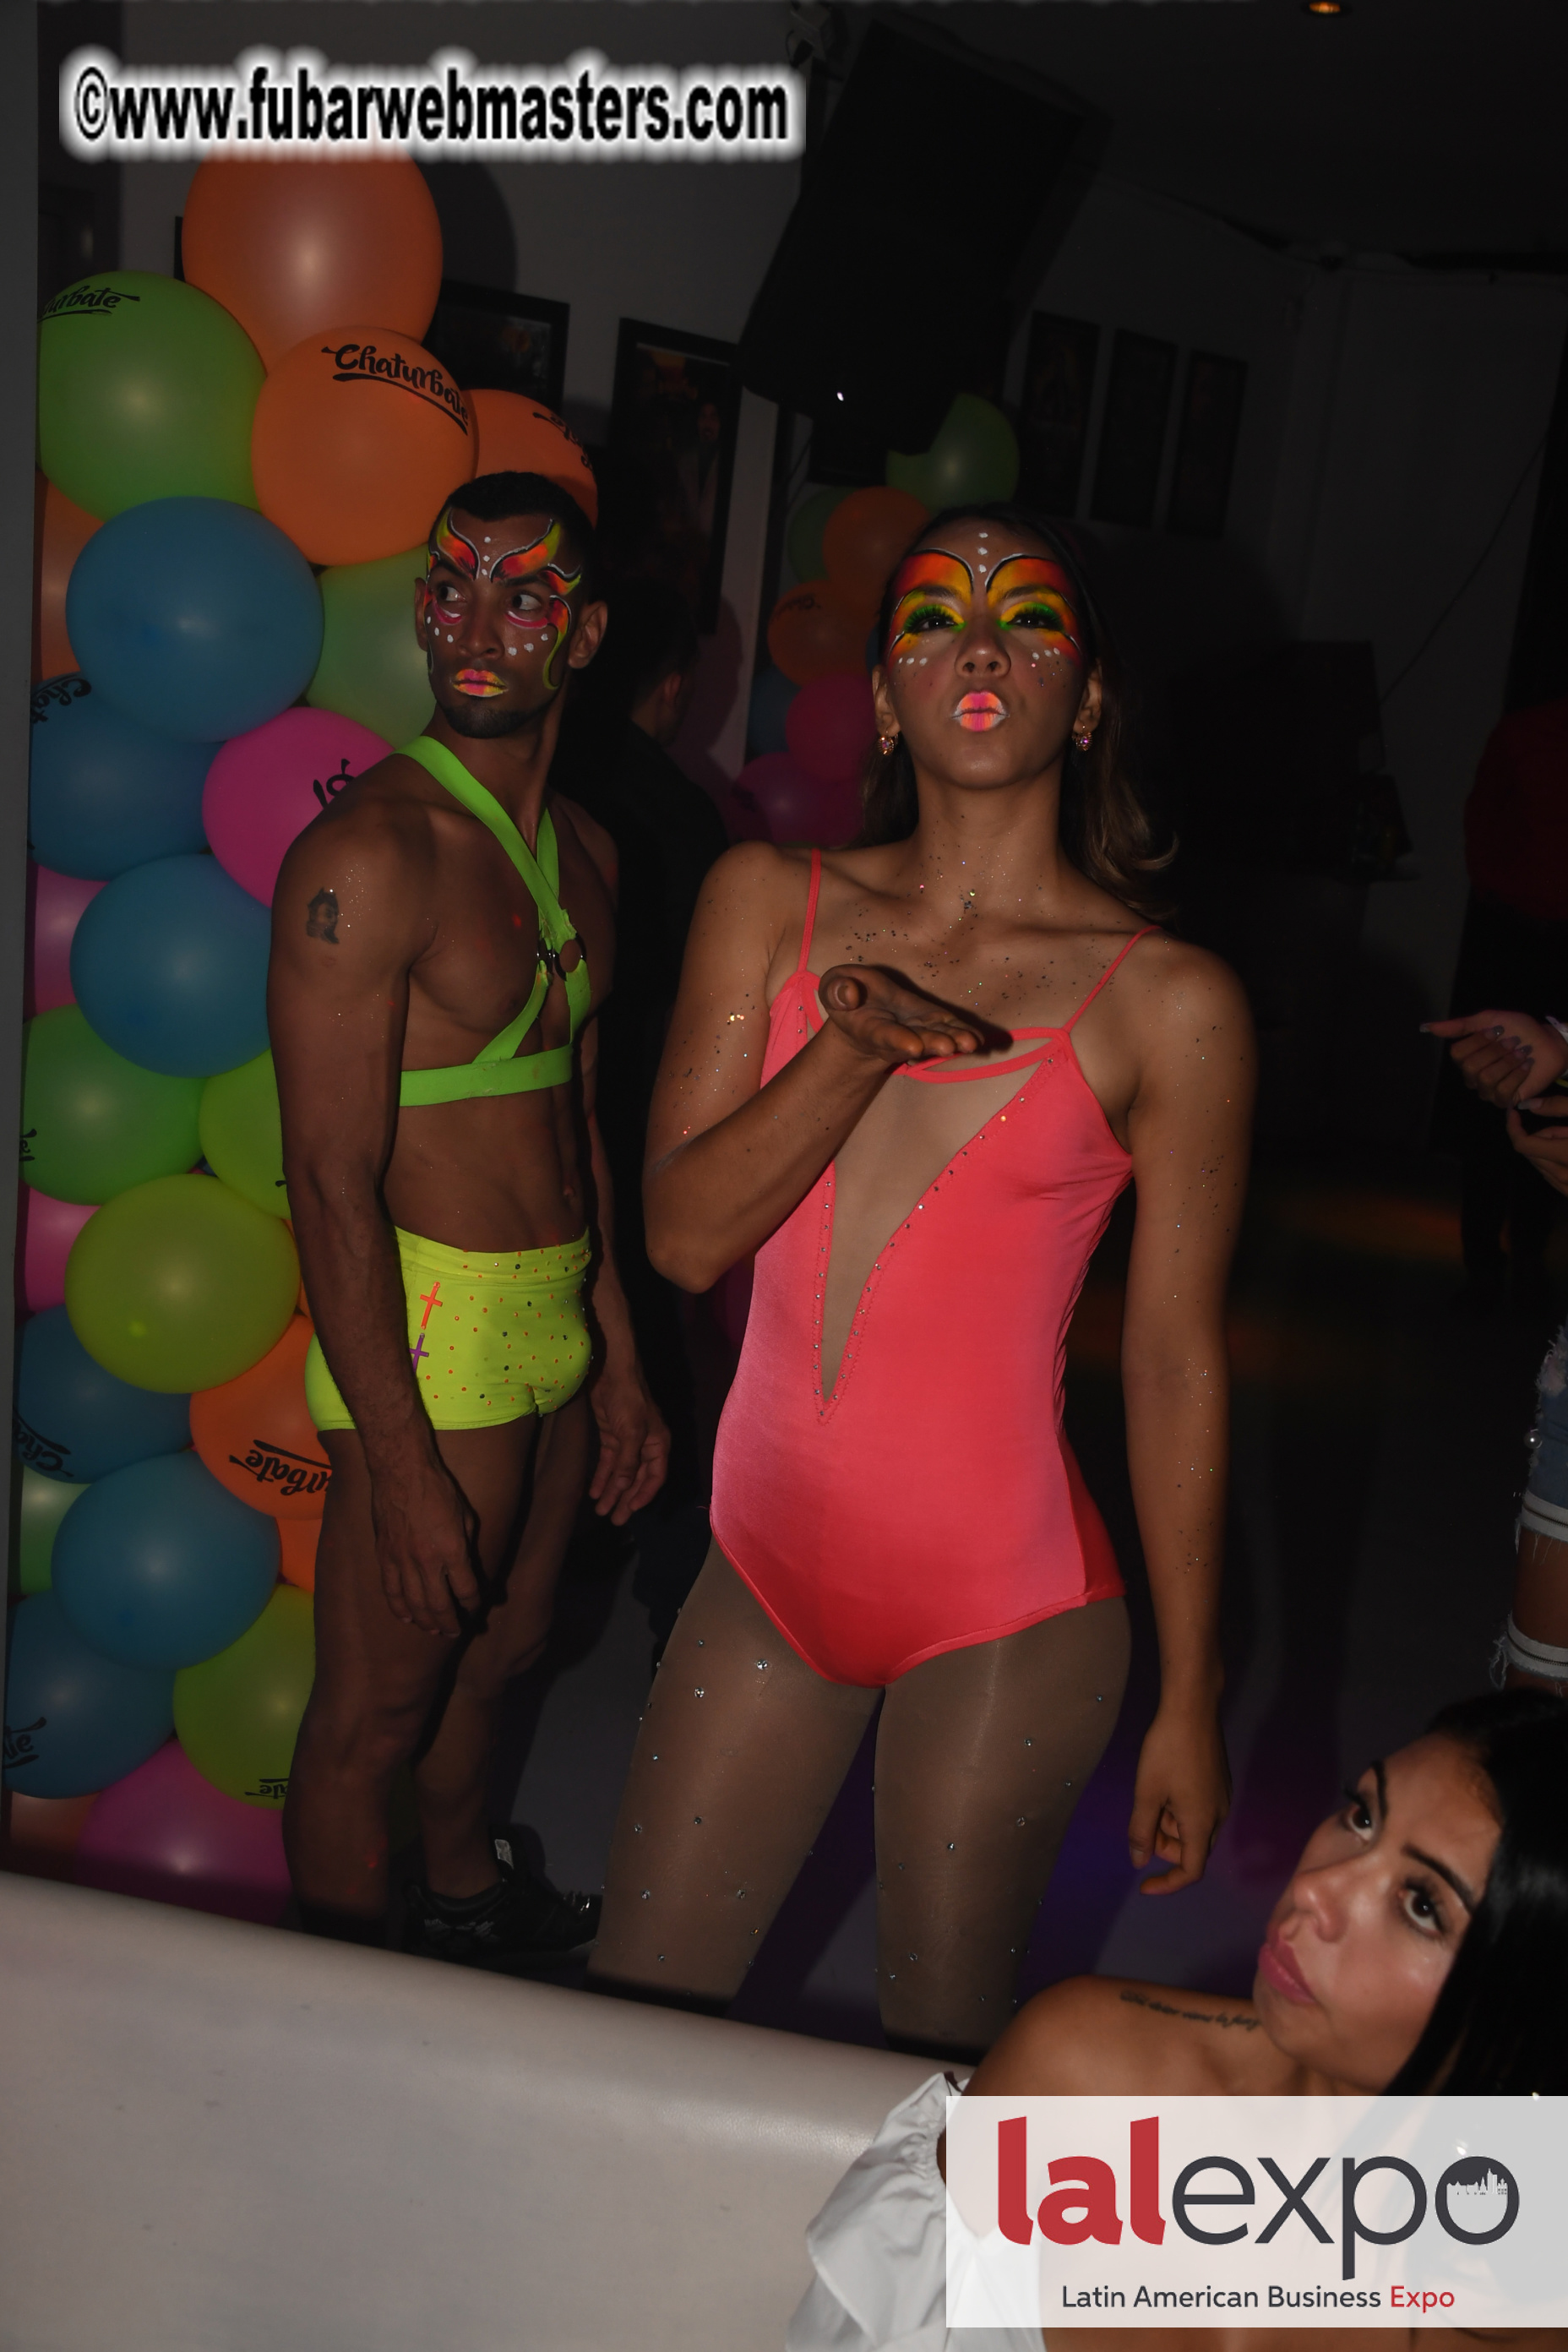 Chaturbate Neon Party